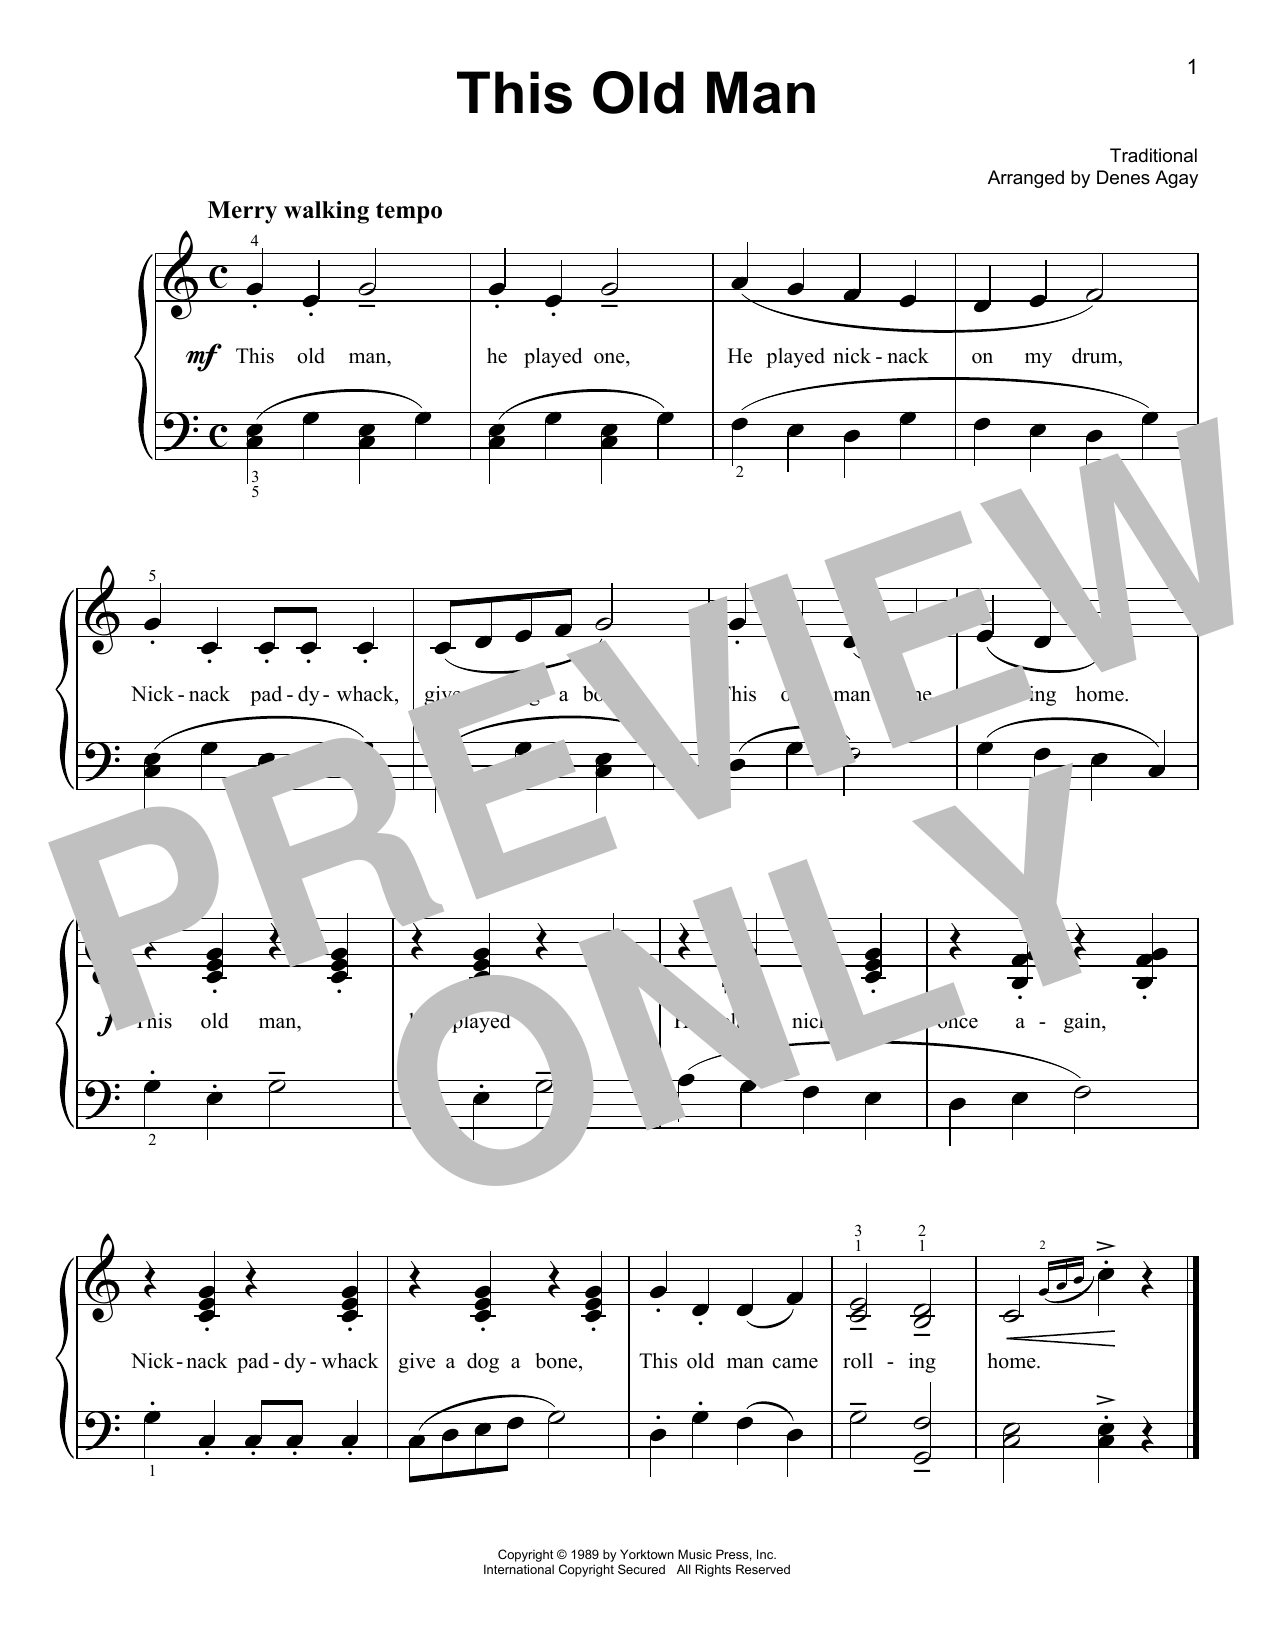 Download Traditional This Old Man (arr. Denes Agay) Sheet Music